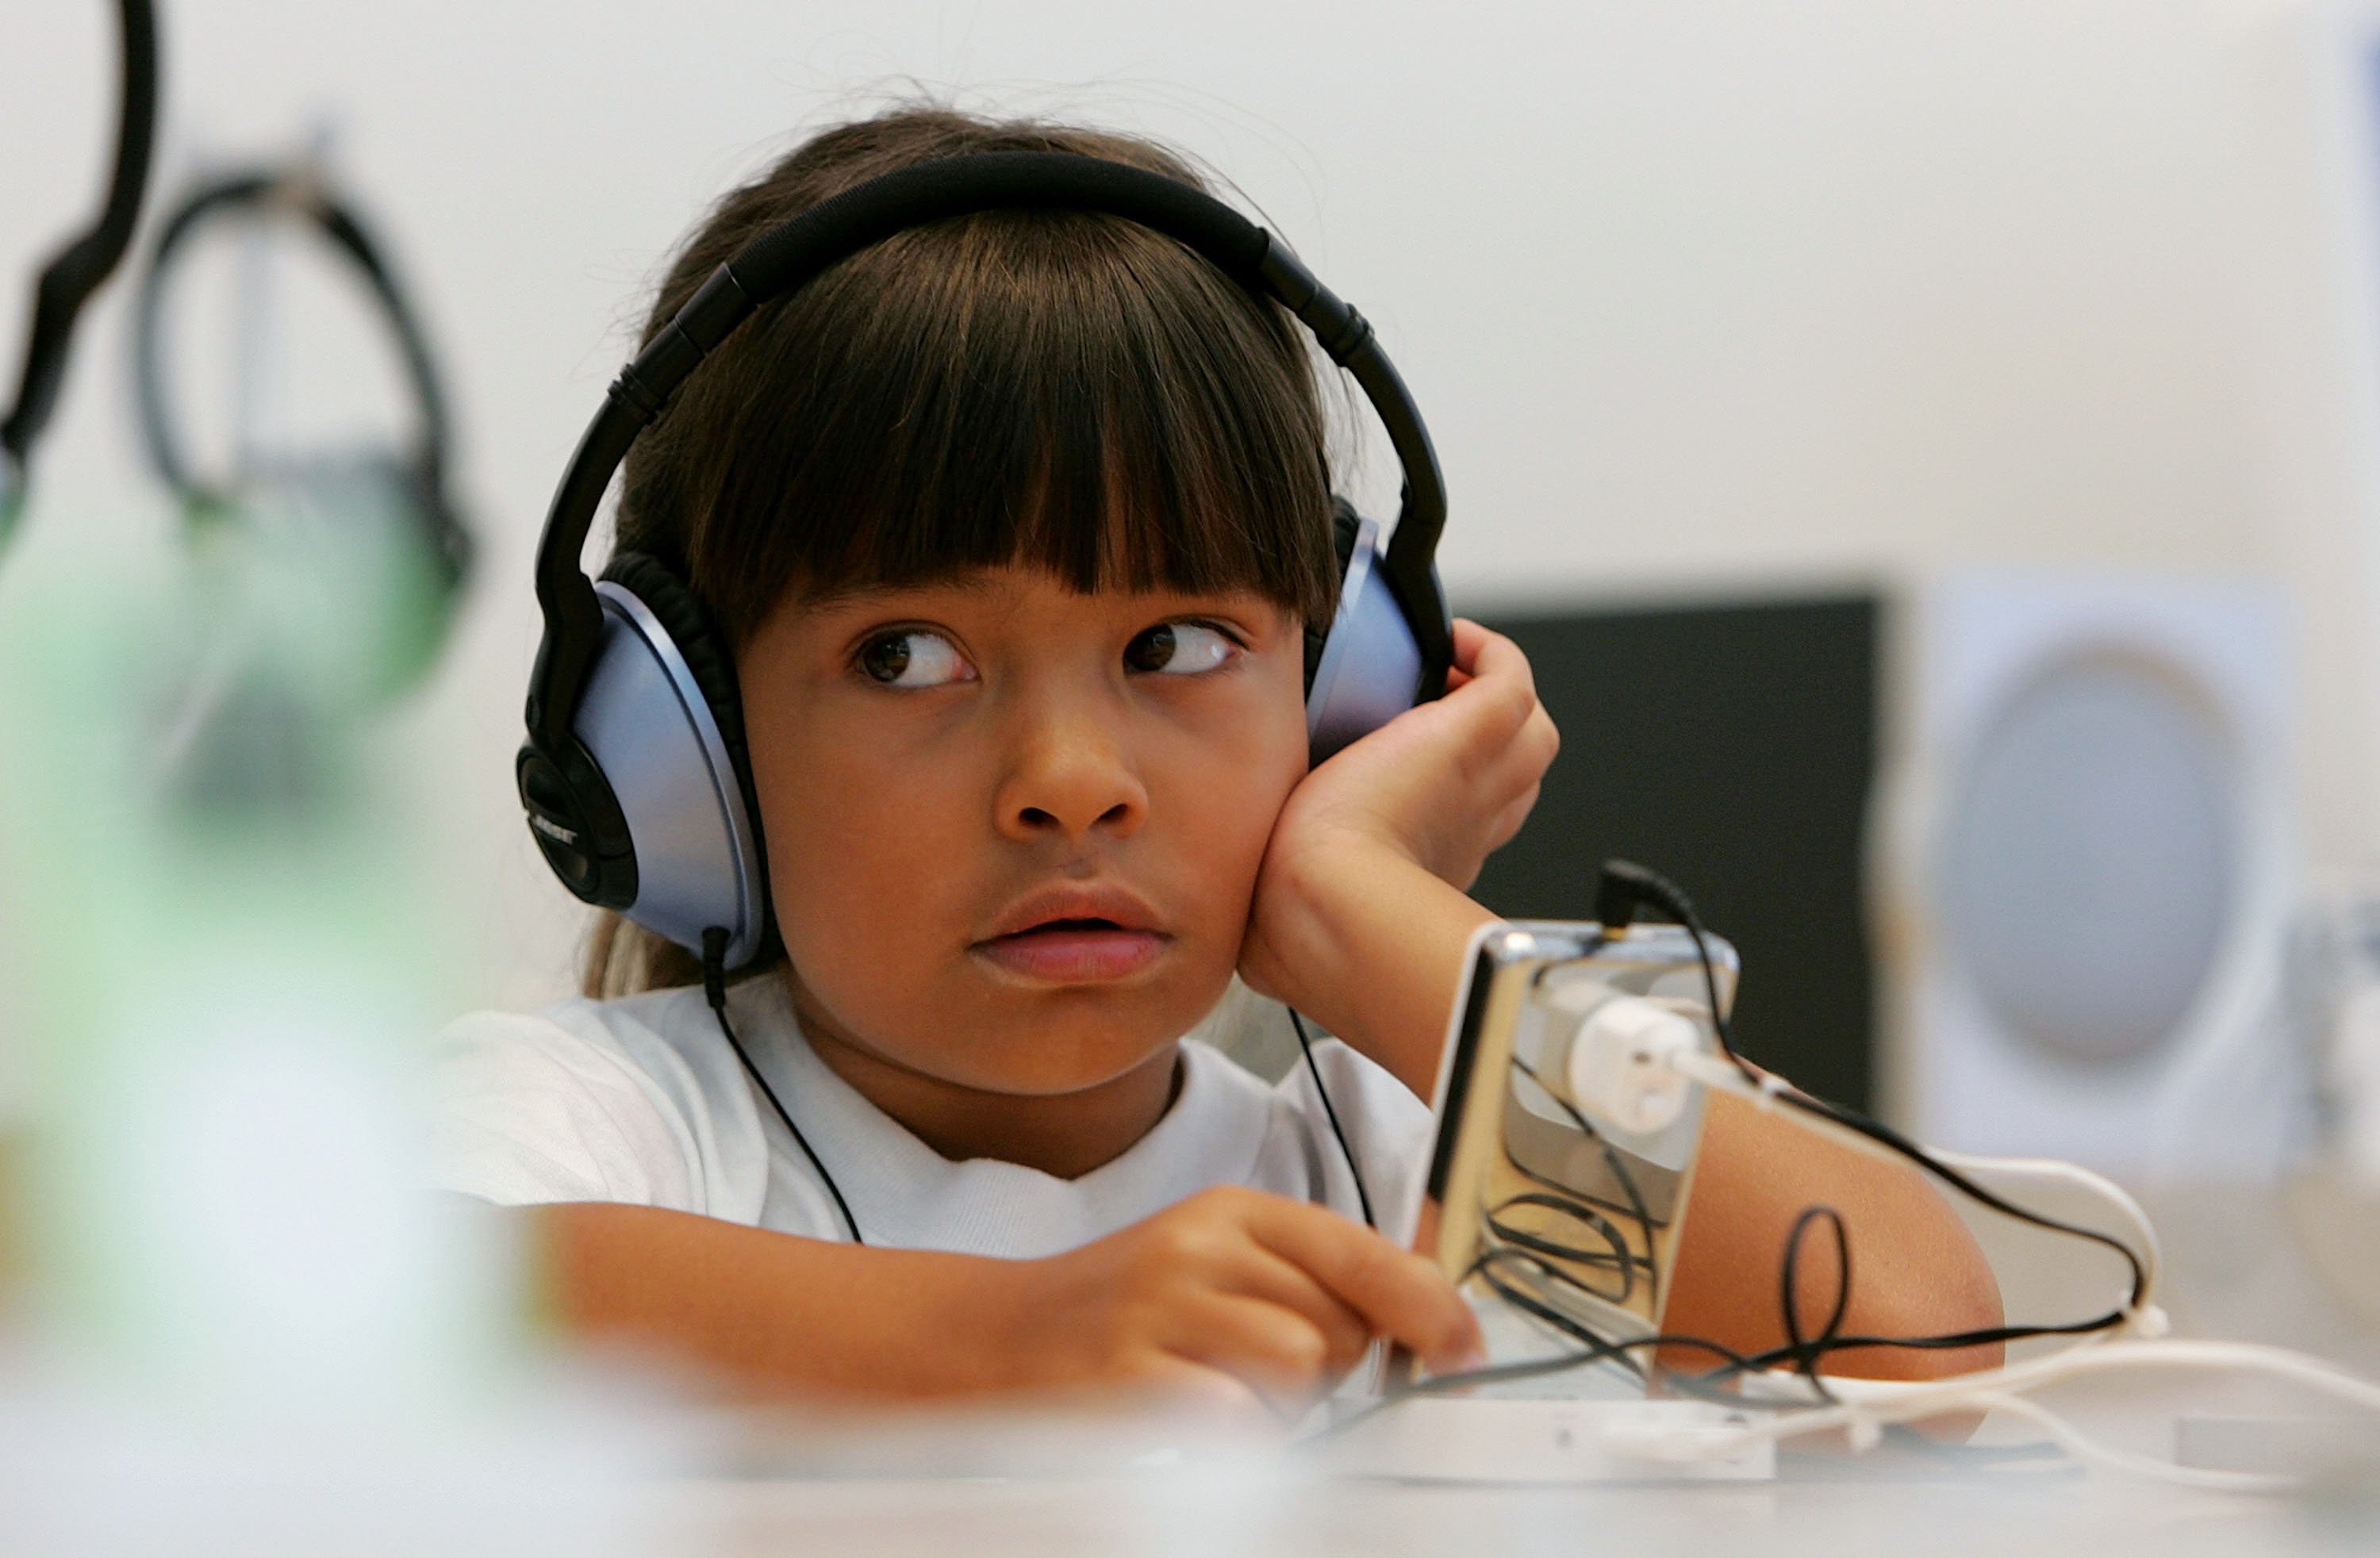 Six-year-old Emma Cordell listens to a new iPod on display at the Apple Store July 14, 2005 in San Francisco, California. (Justin Sullivan&mdash;Getty Images)